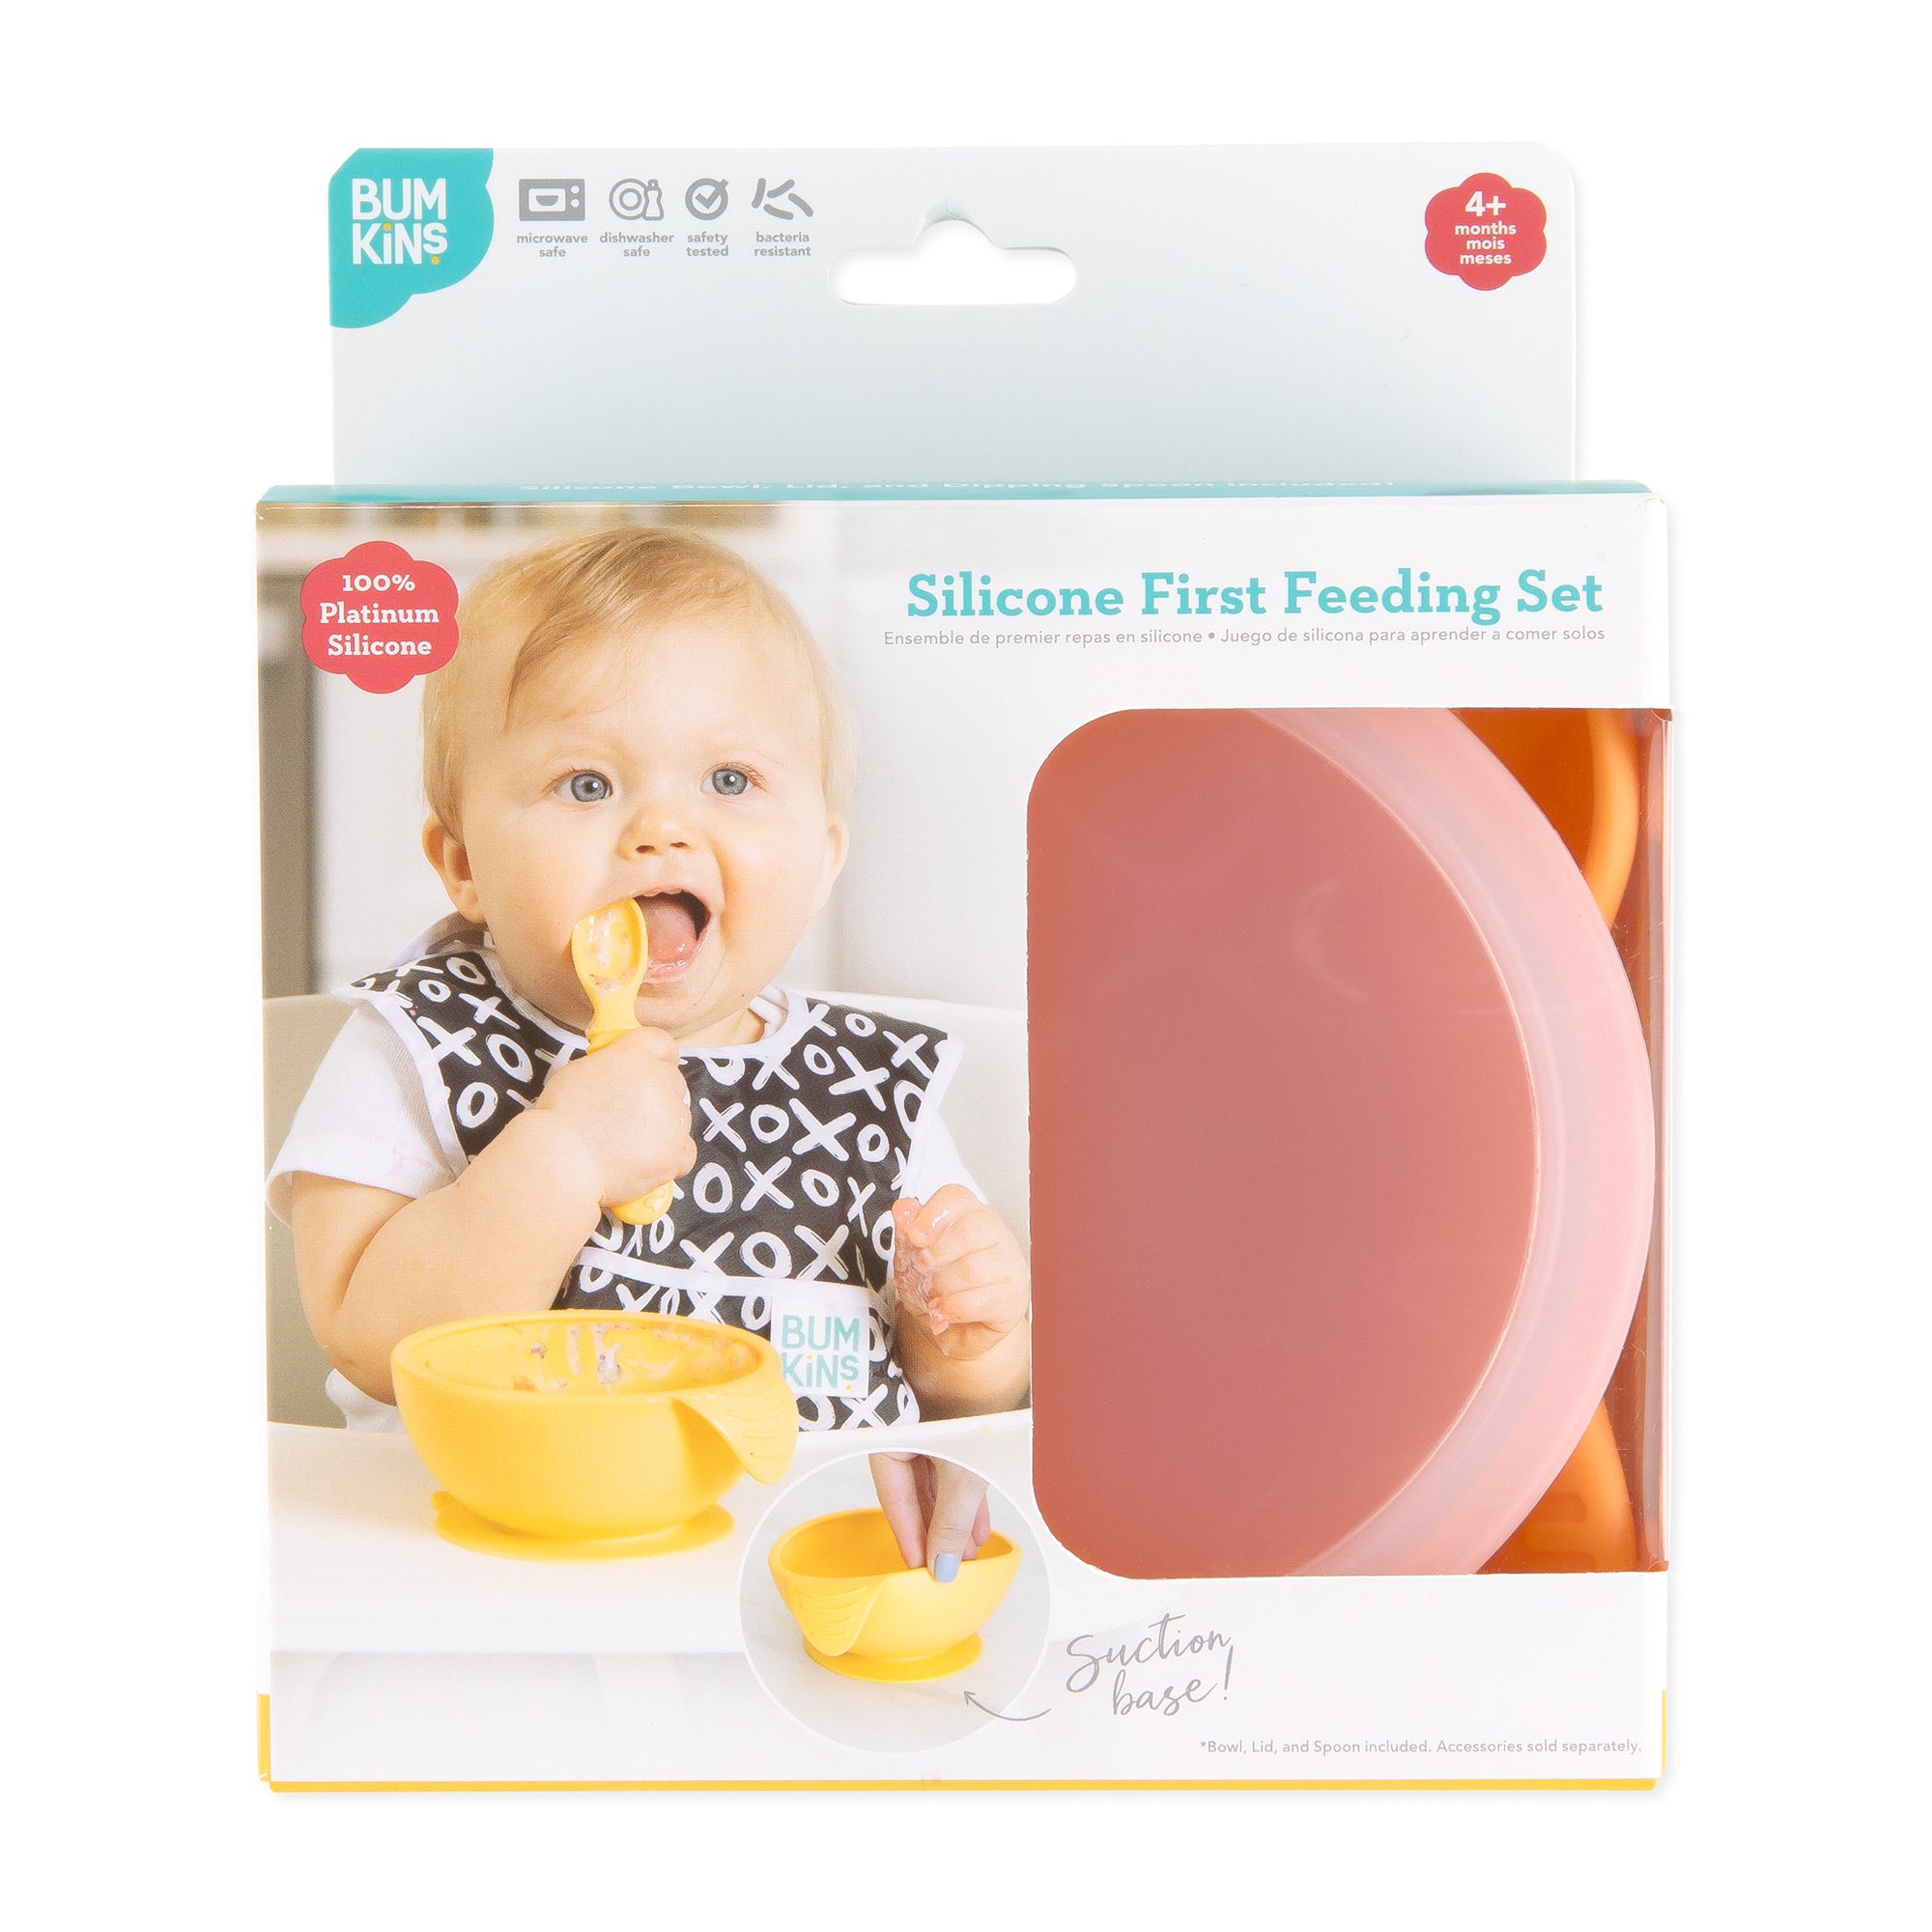 Top Rated Silicone Bowl and Spoon Set for Weaning Kids